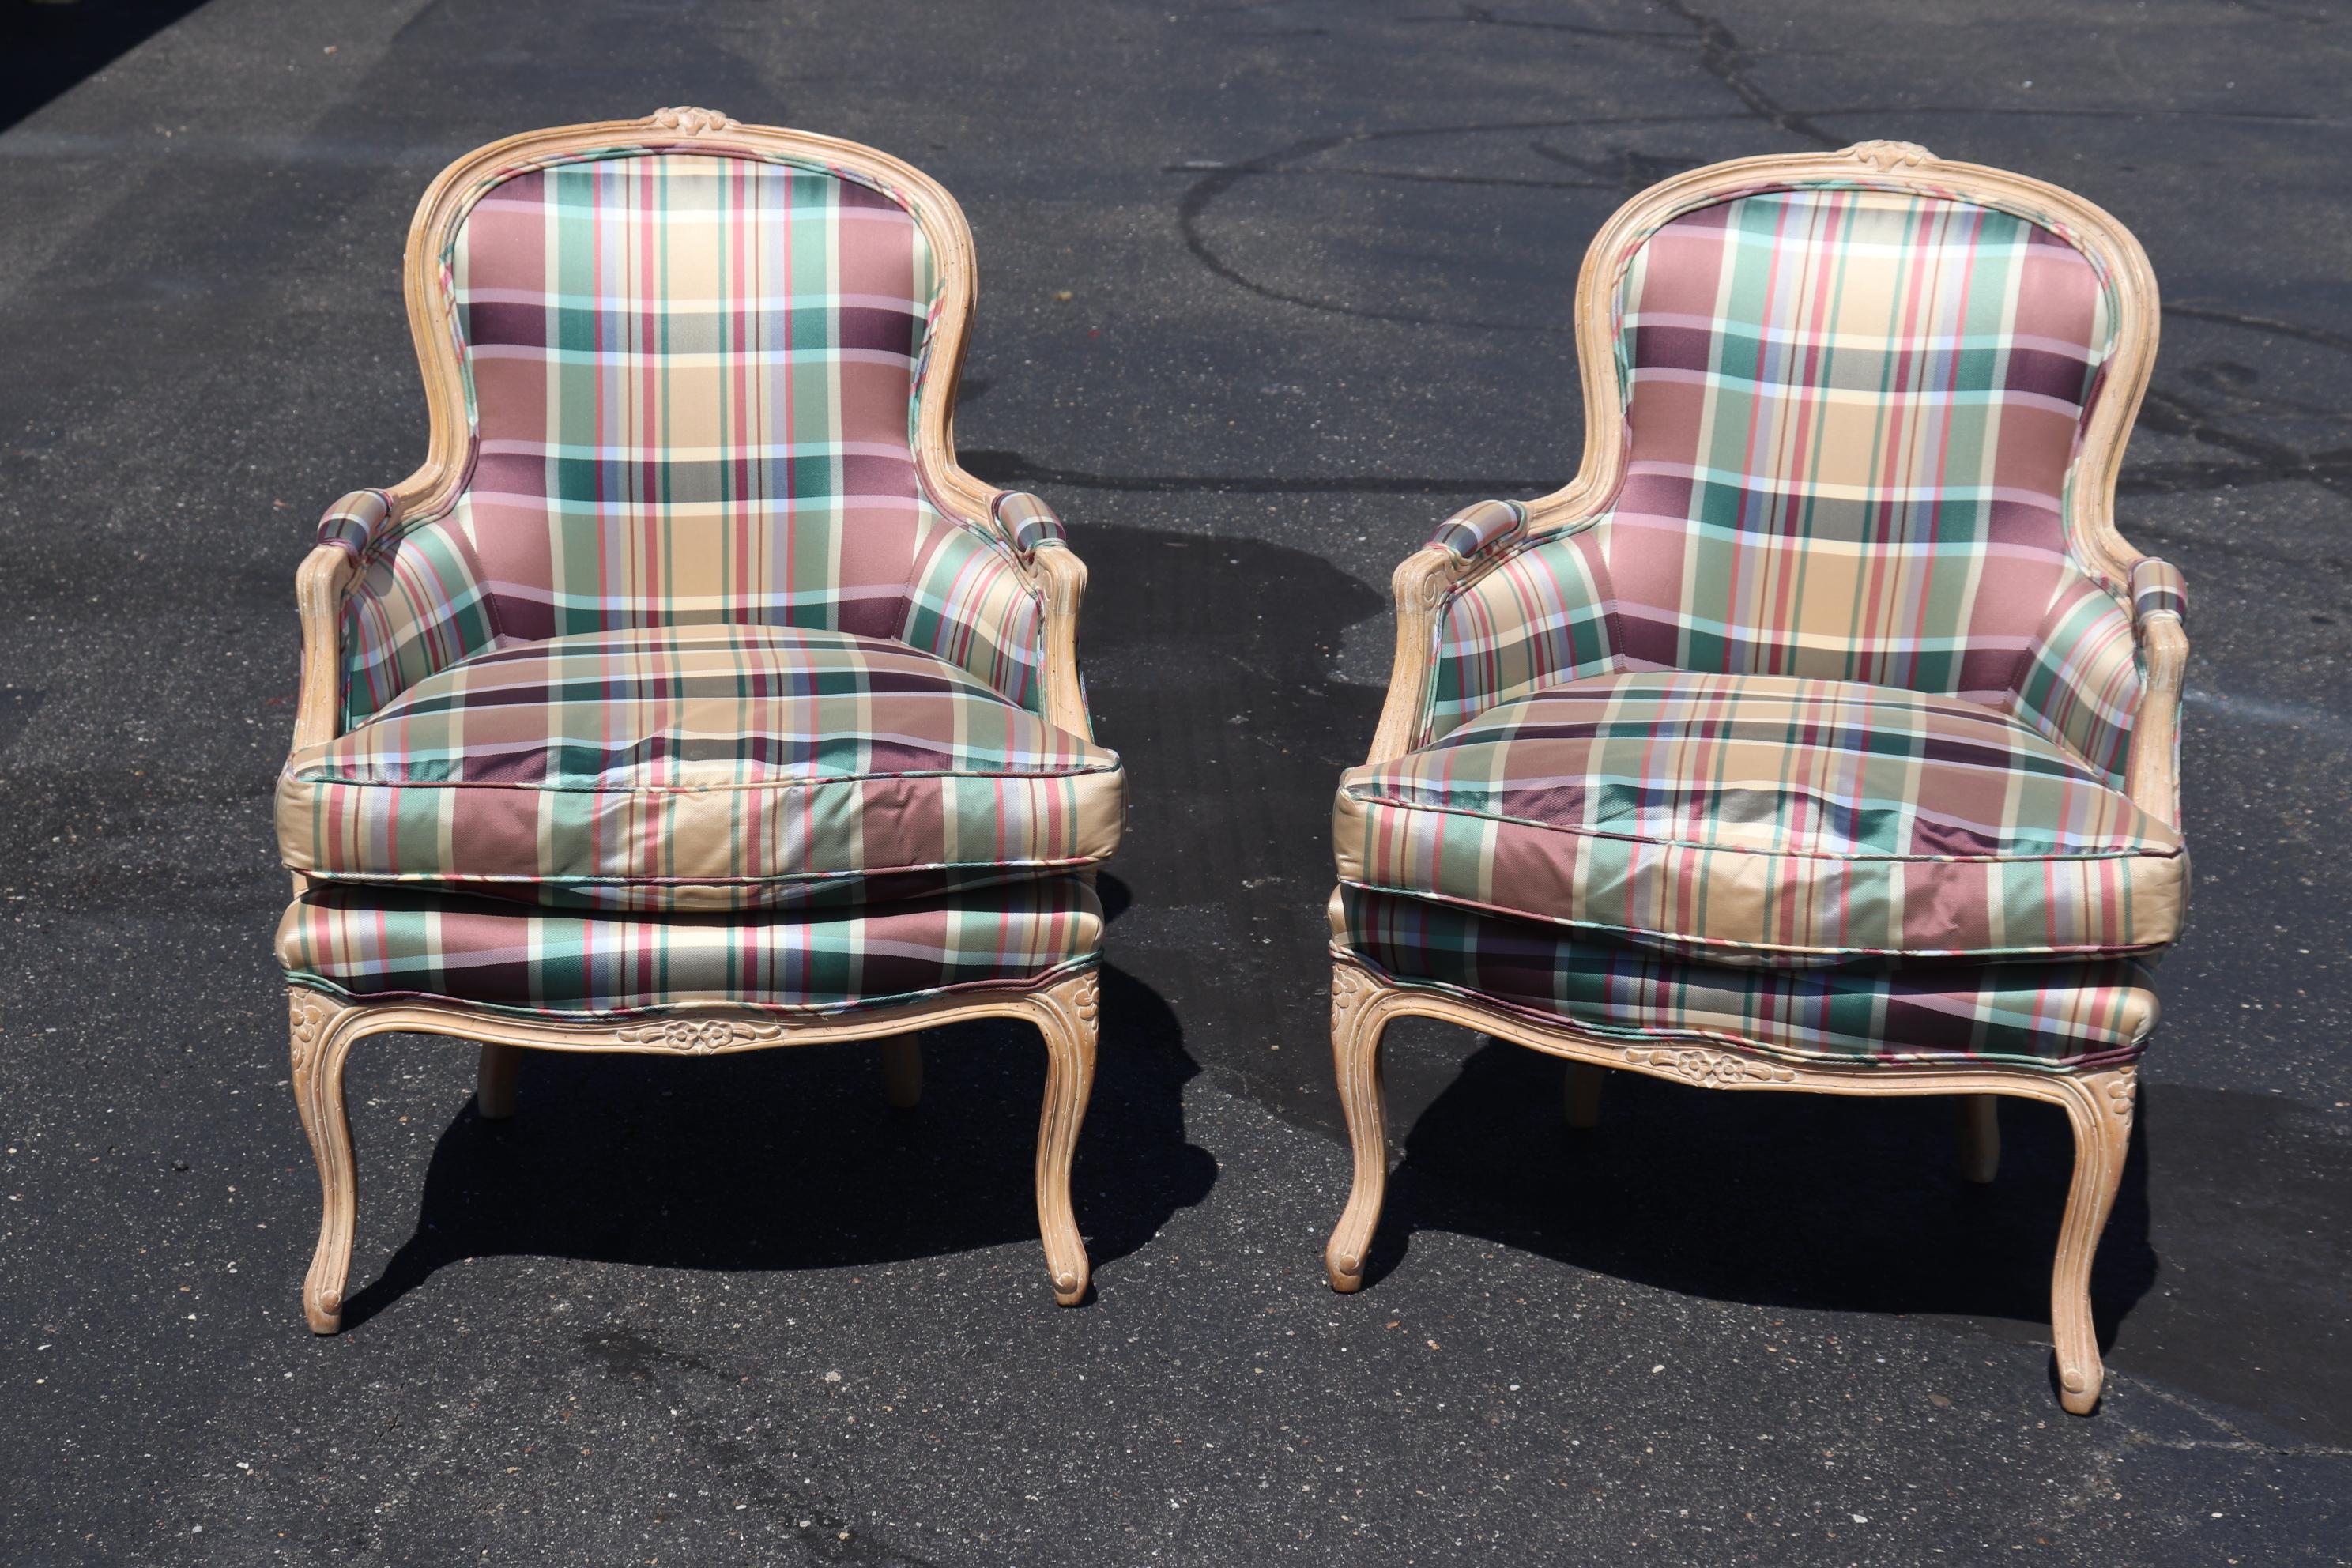 This is a gorgeous pair of plaid upholstered Louis XV Bereger chairs in upscale upholstery and featuring a limed walnut finish and the upholstery is very clean. The chairs measure 37 tall x 27 wide x 31 deep and the seat height of 20 inches. They